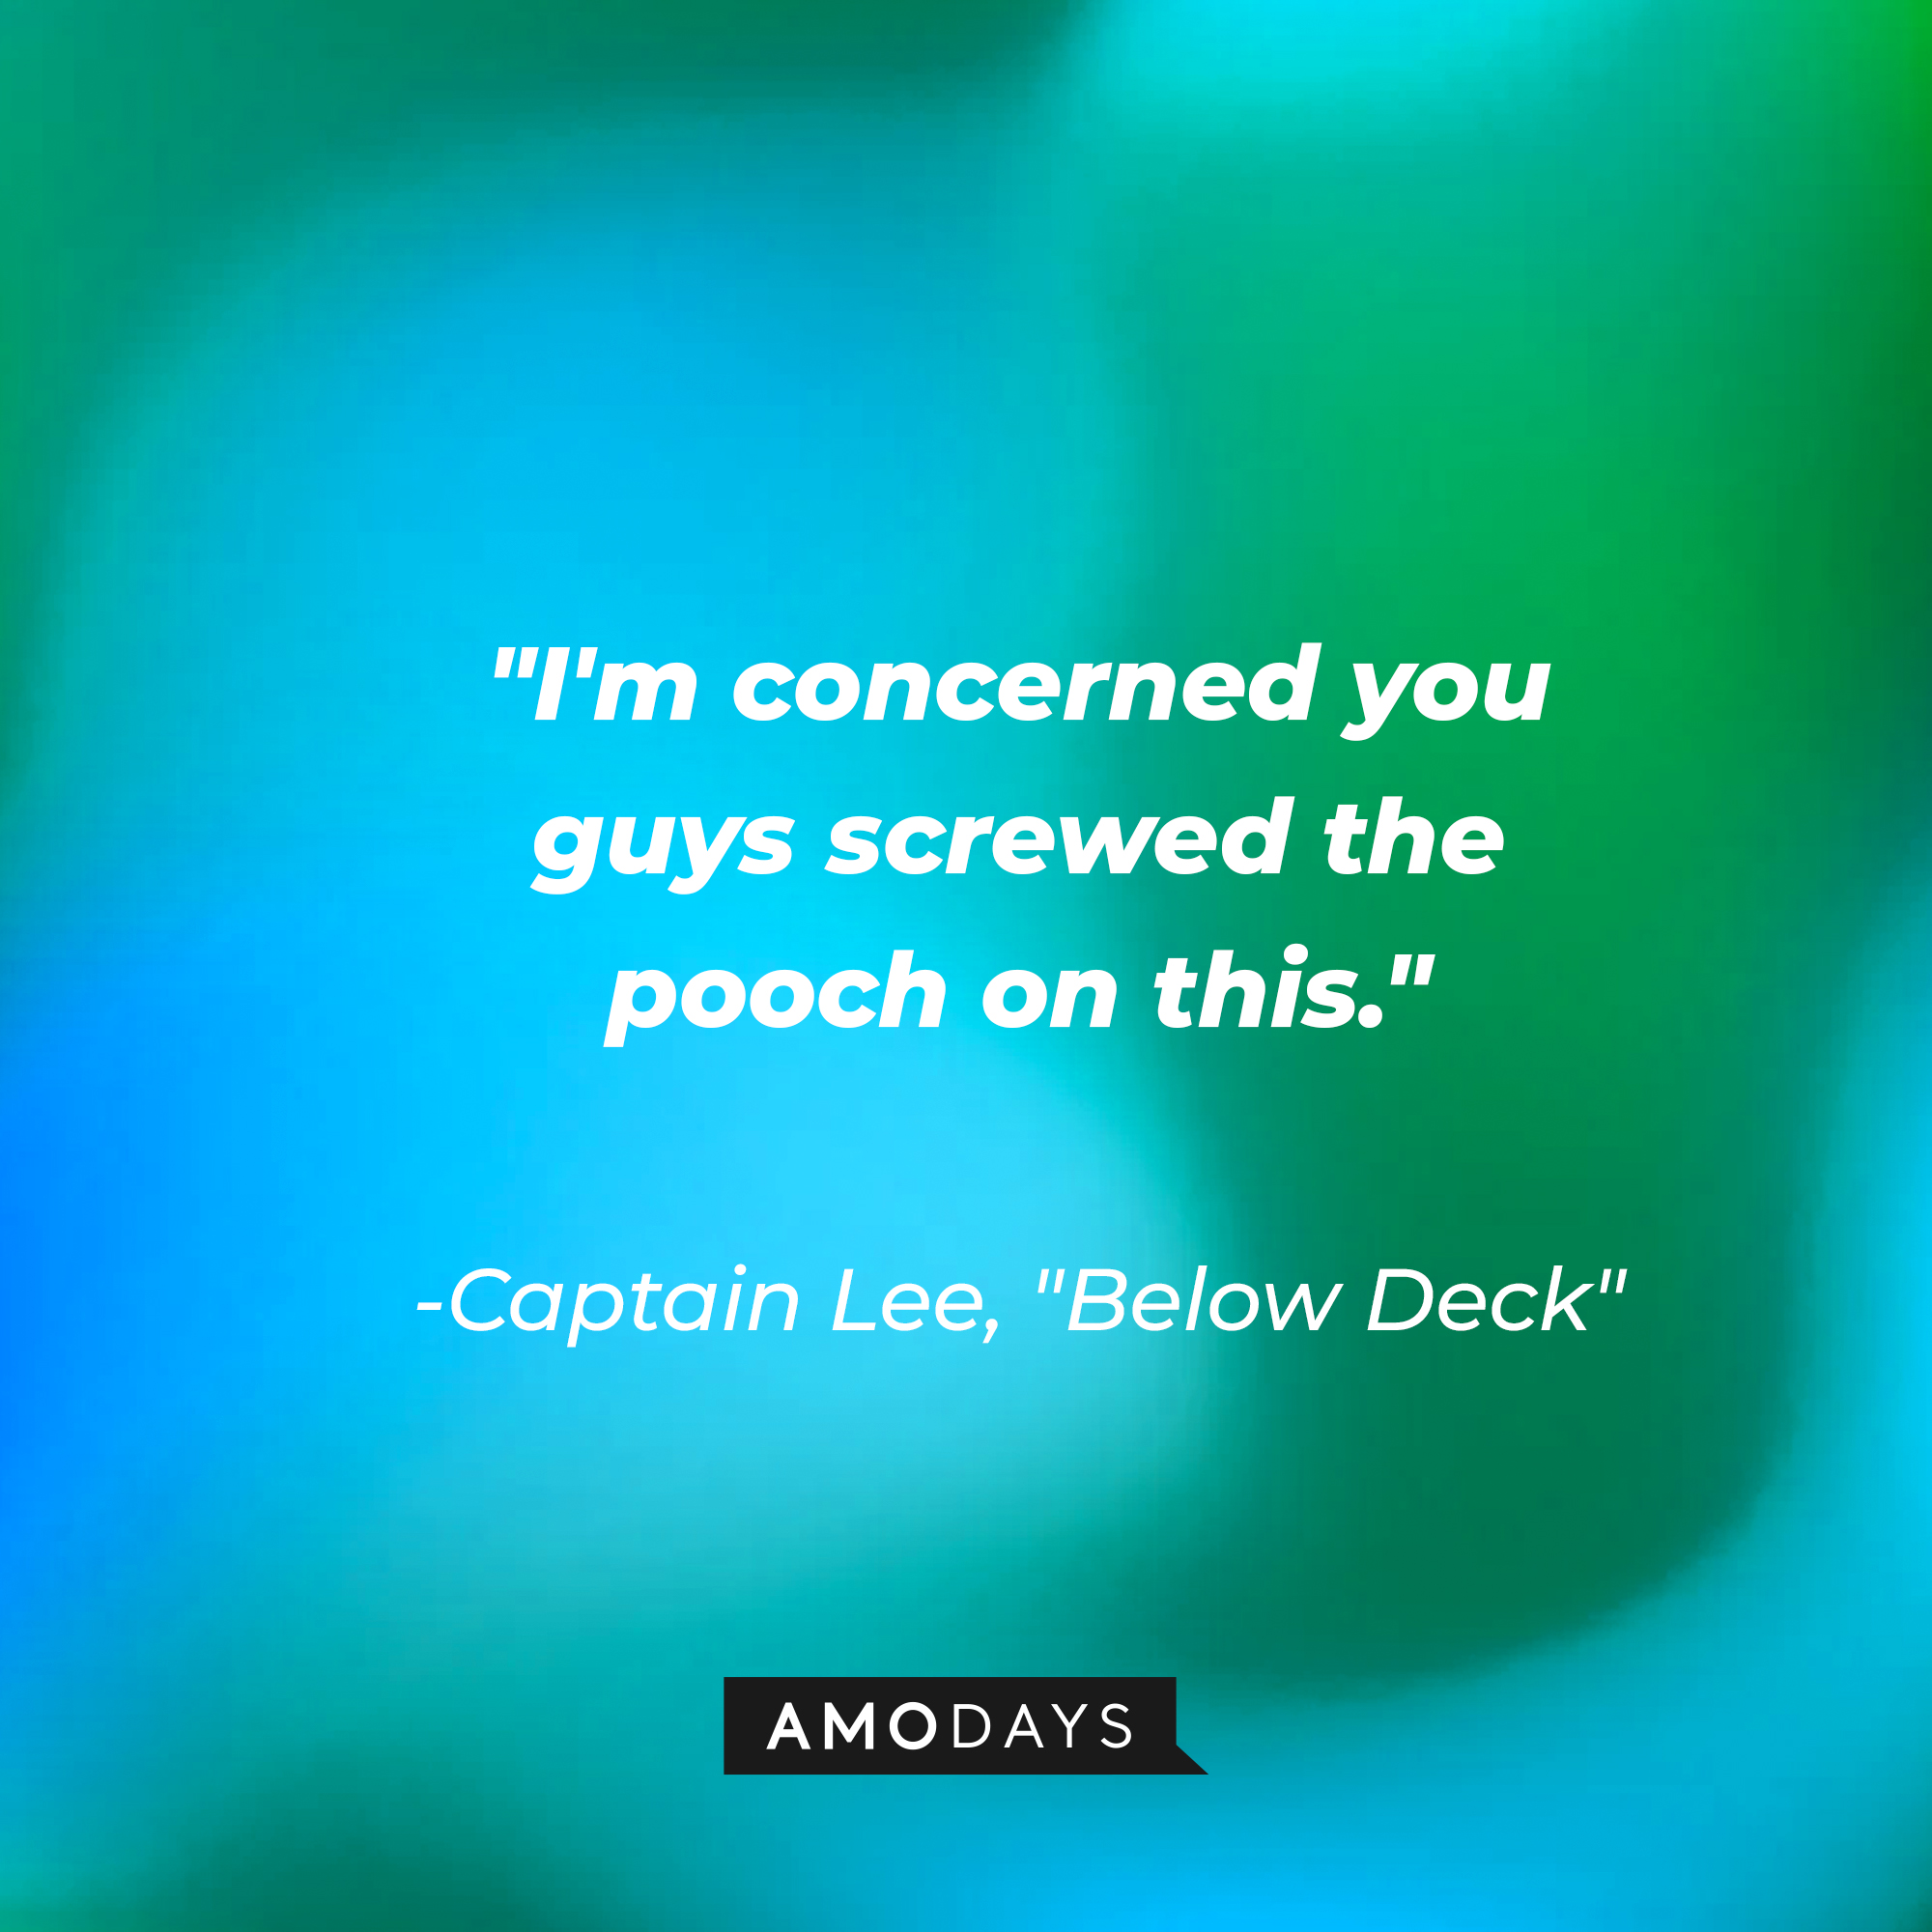 Captain Lee's quote from "Below Deck:" "I'm concerned you guys screwed the pooch on this." | Source: AmoDays